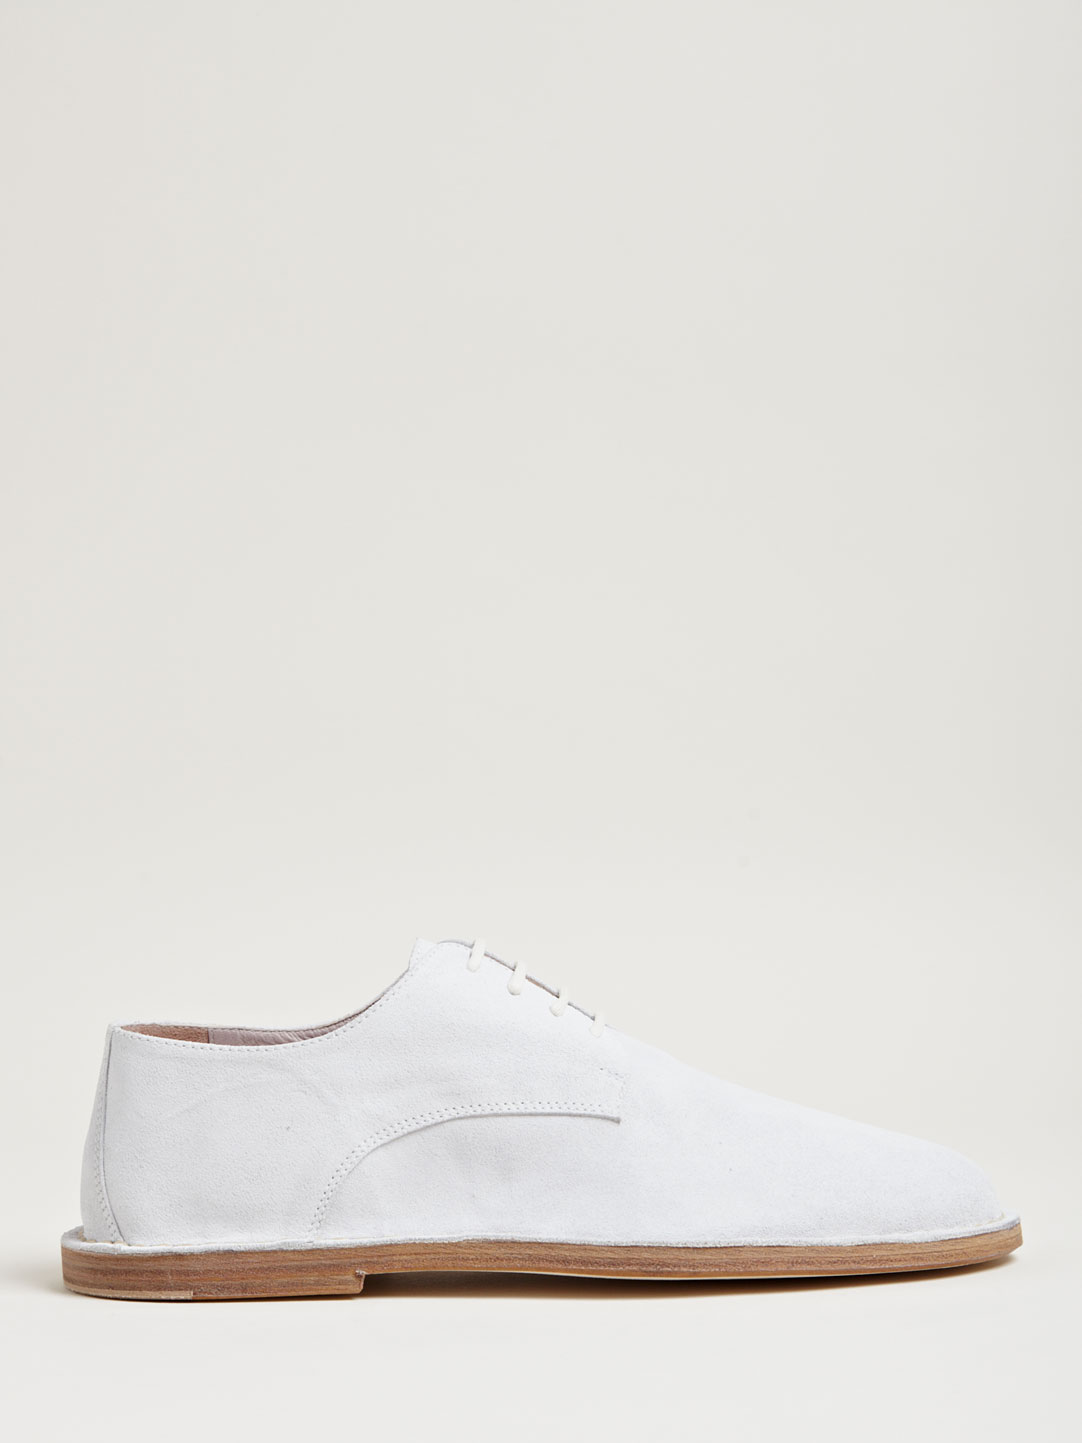 Lyst - Ann Demeulemeester Mens Suede Leather Derby Shoes for Men